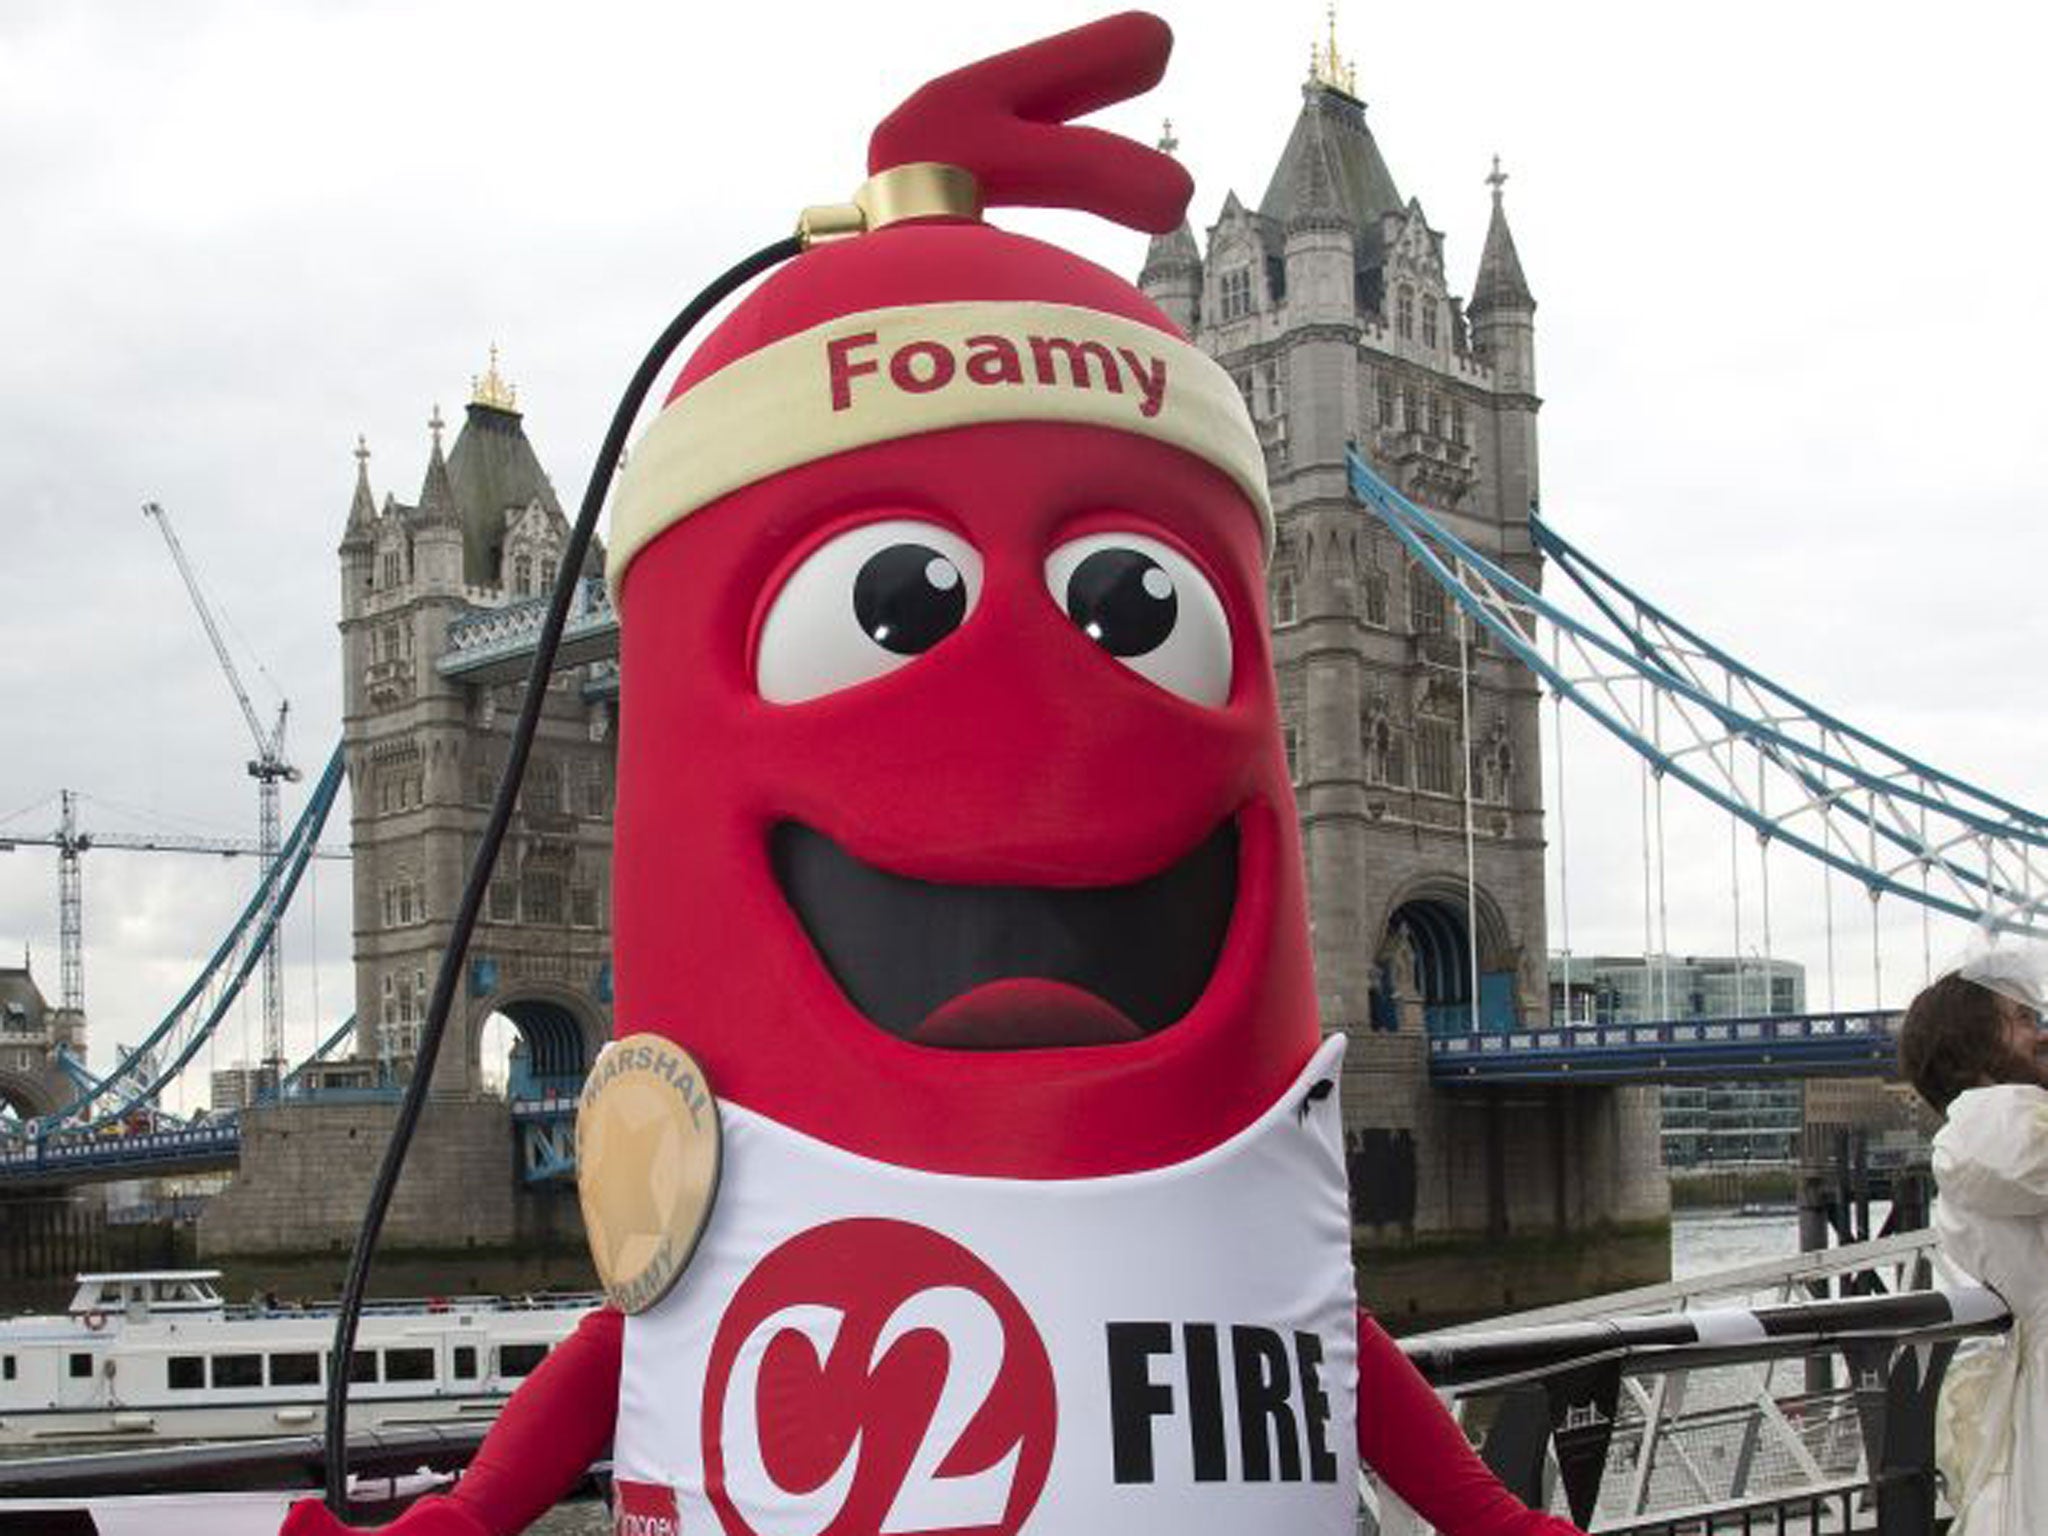 Among them will be 60 runners attempting to set an array of Guinness World Records – including Jerome Timbrell who hopes to complete the fastest marathon as a mascot while dressed as a fire extinguisher